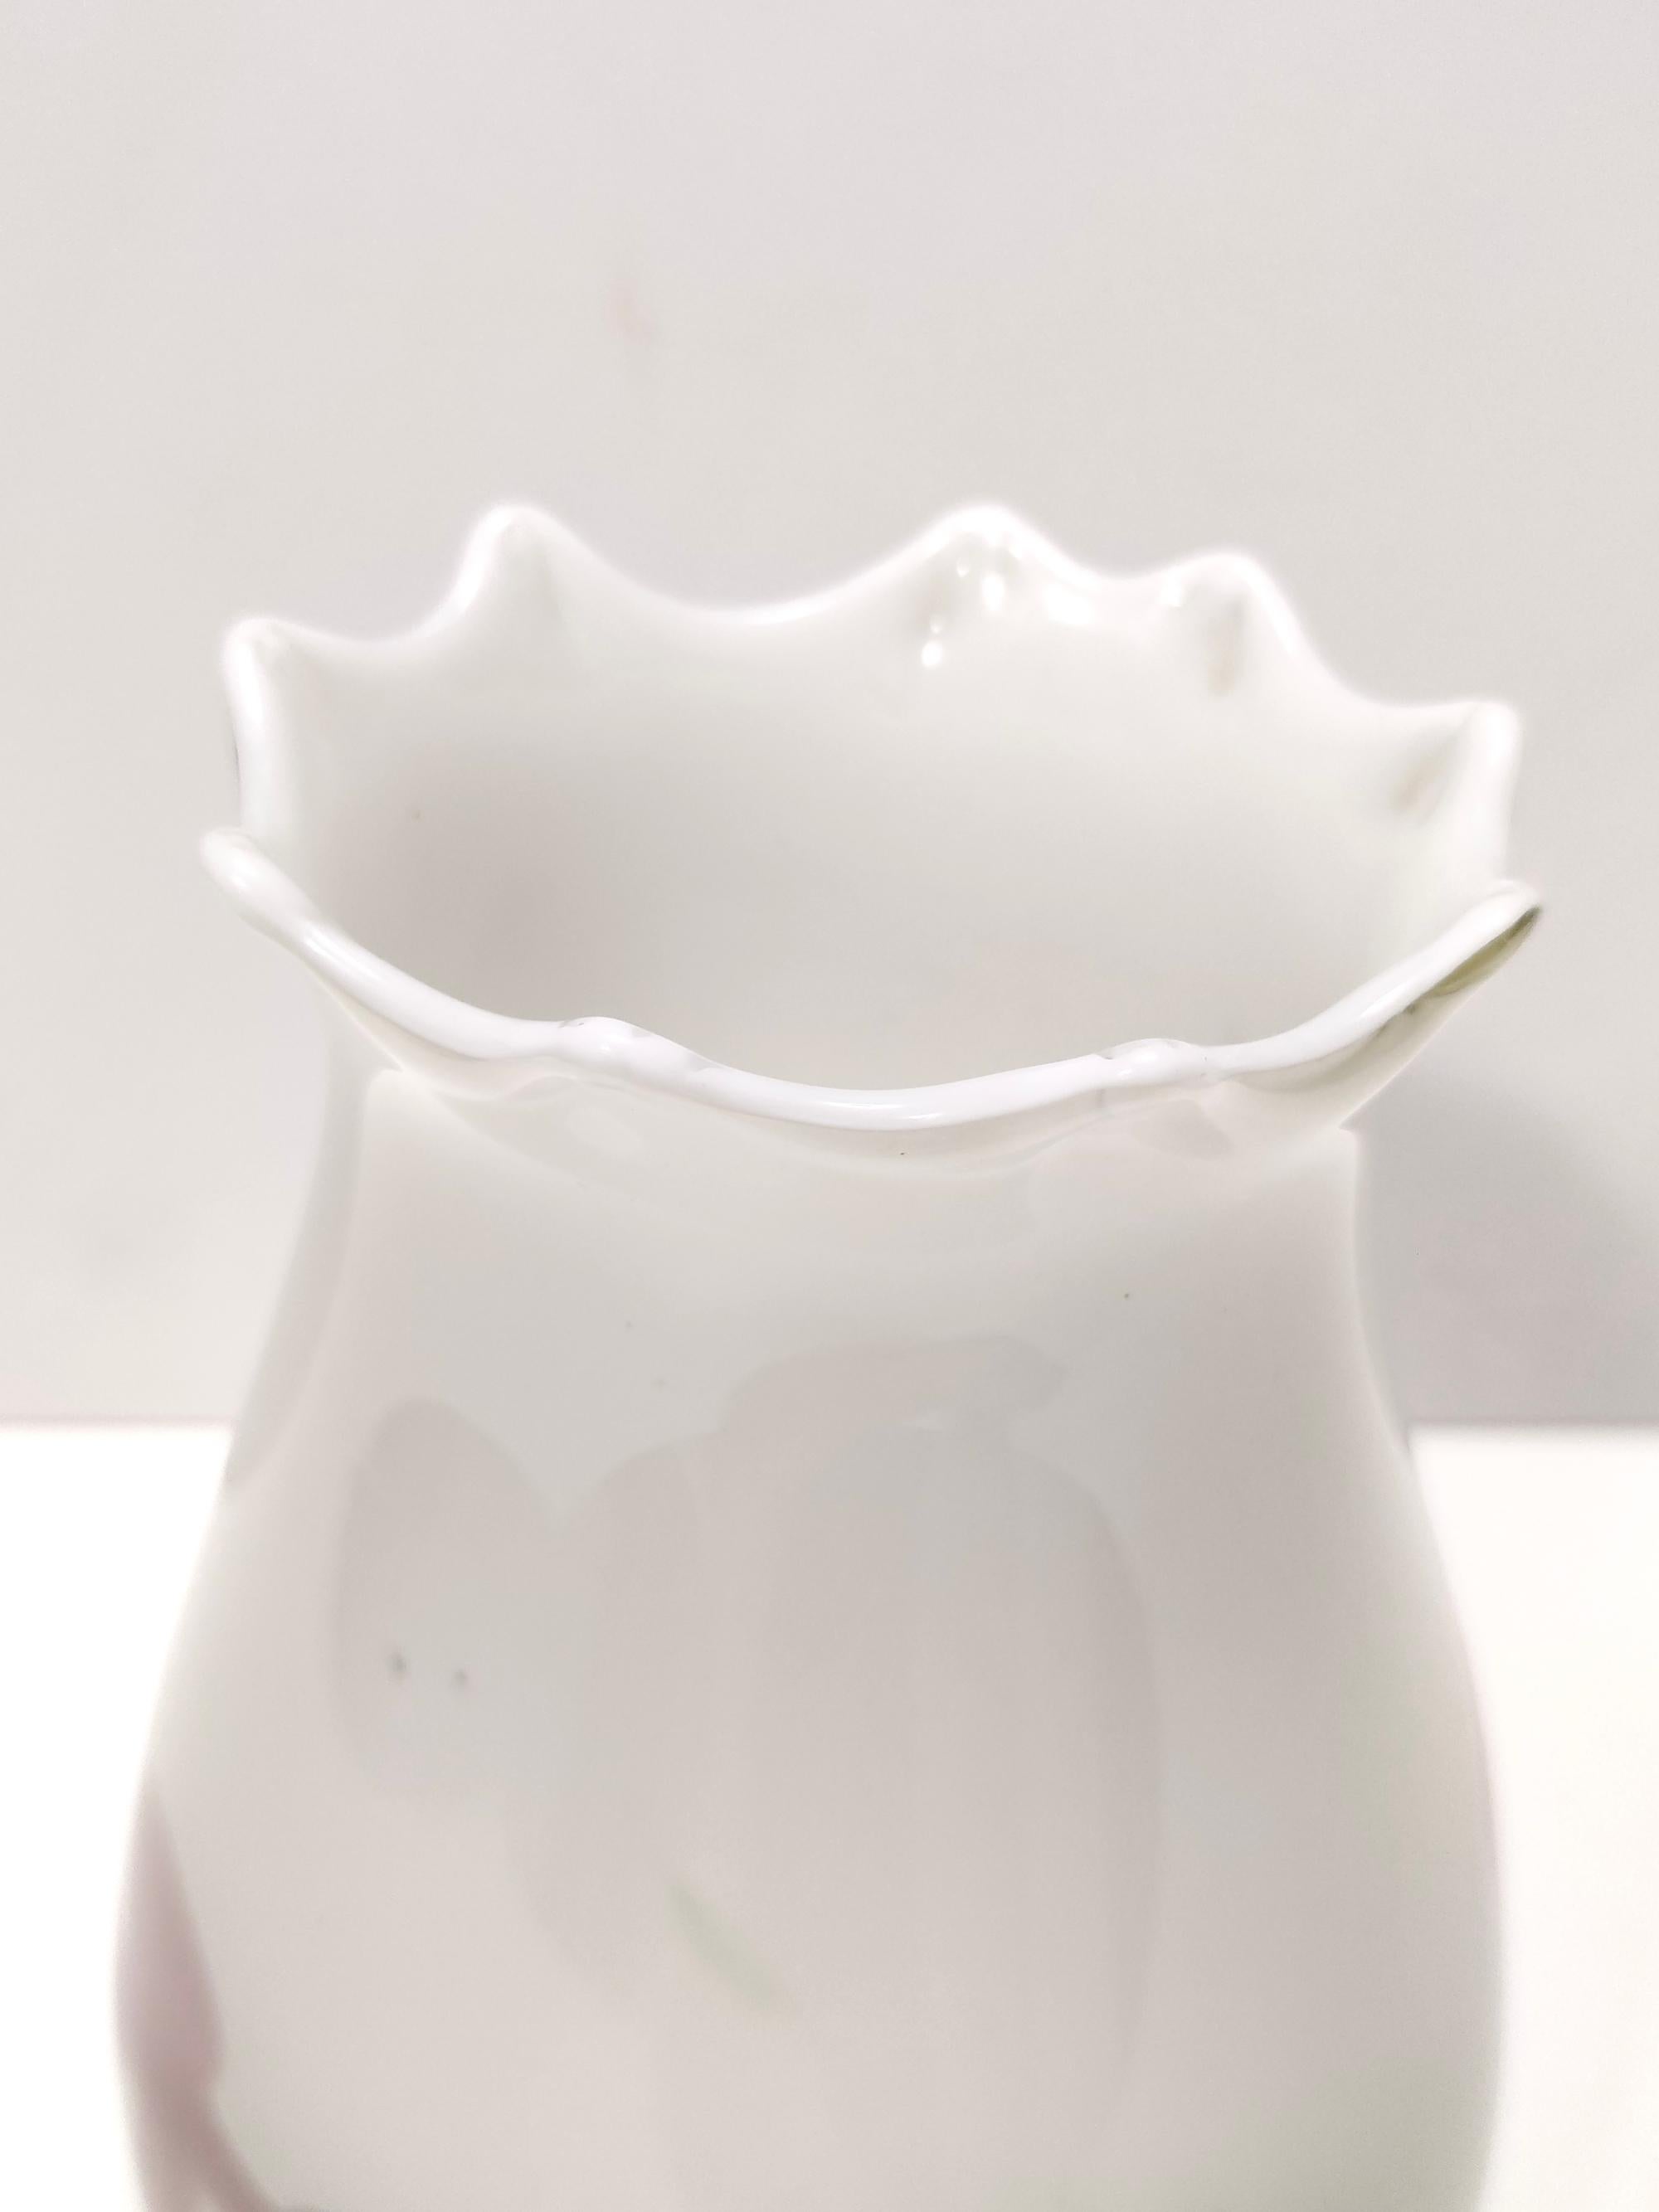 Vintage White Murano Glass Vase attr. to Dino Martens for Aureliano Toso For Sale 5